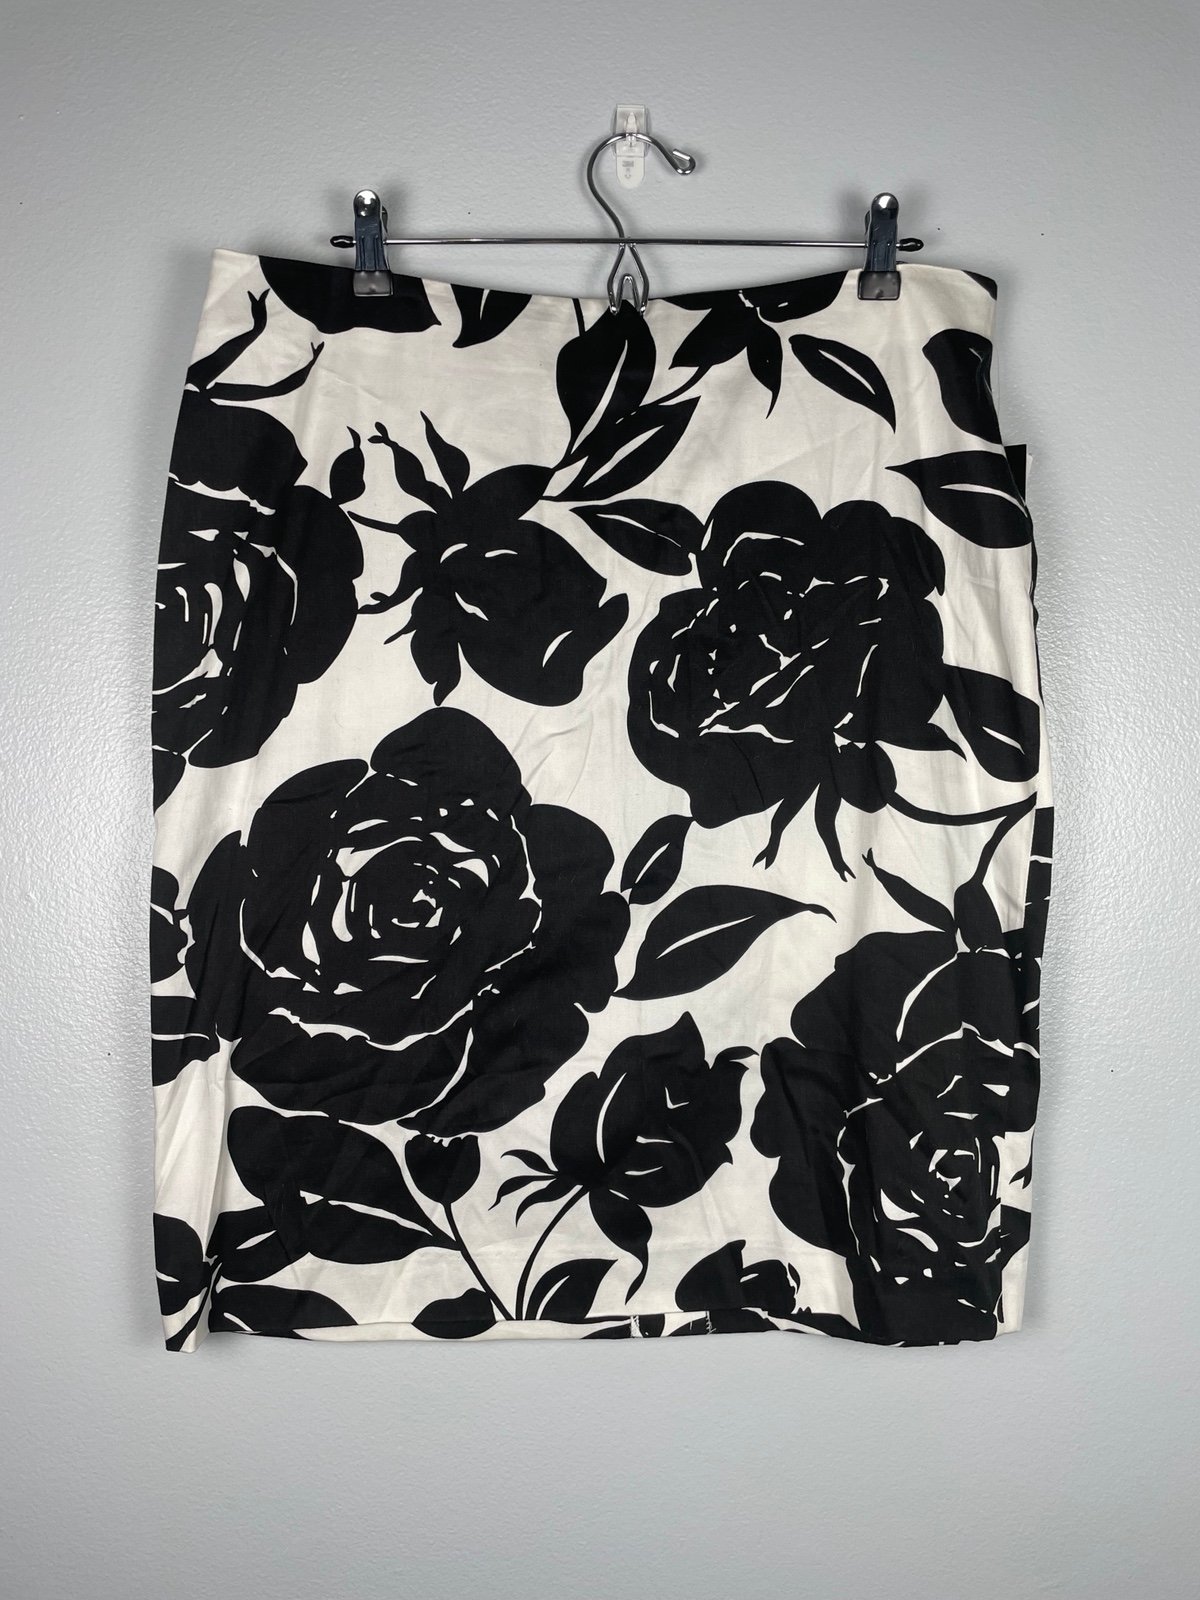 the Lowest price NWT Grace Elements Black and White Floral Skirt Size 16 fv9ySLCLN no tax